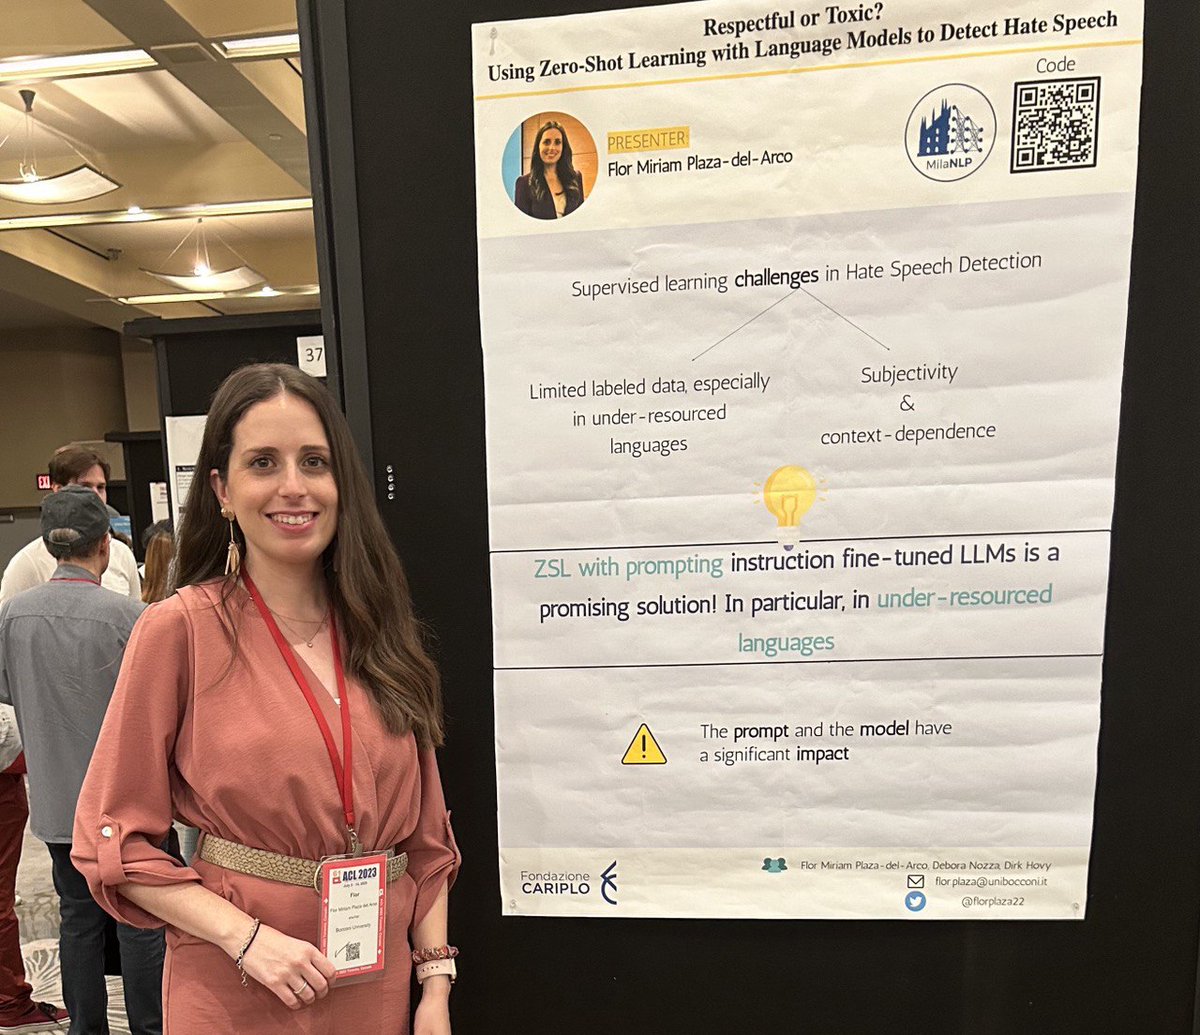 Had a great time presenting my poster 'Respectful or Toxic? Using Zero-Shot Learning with Language Models to Detect Hate Speech' at @WOAHWorkshop Special thanks to @debora_nozza for the inspiring #betterposter design 🎨 Thanks to all who dropped by! #ACL2023